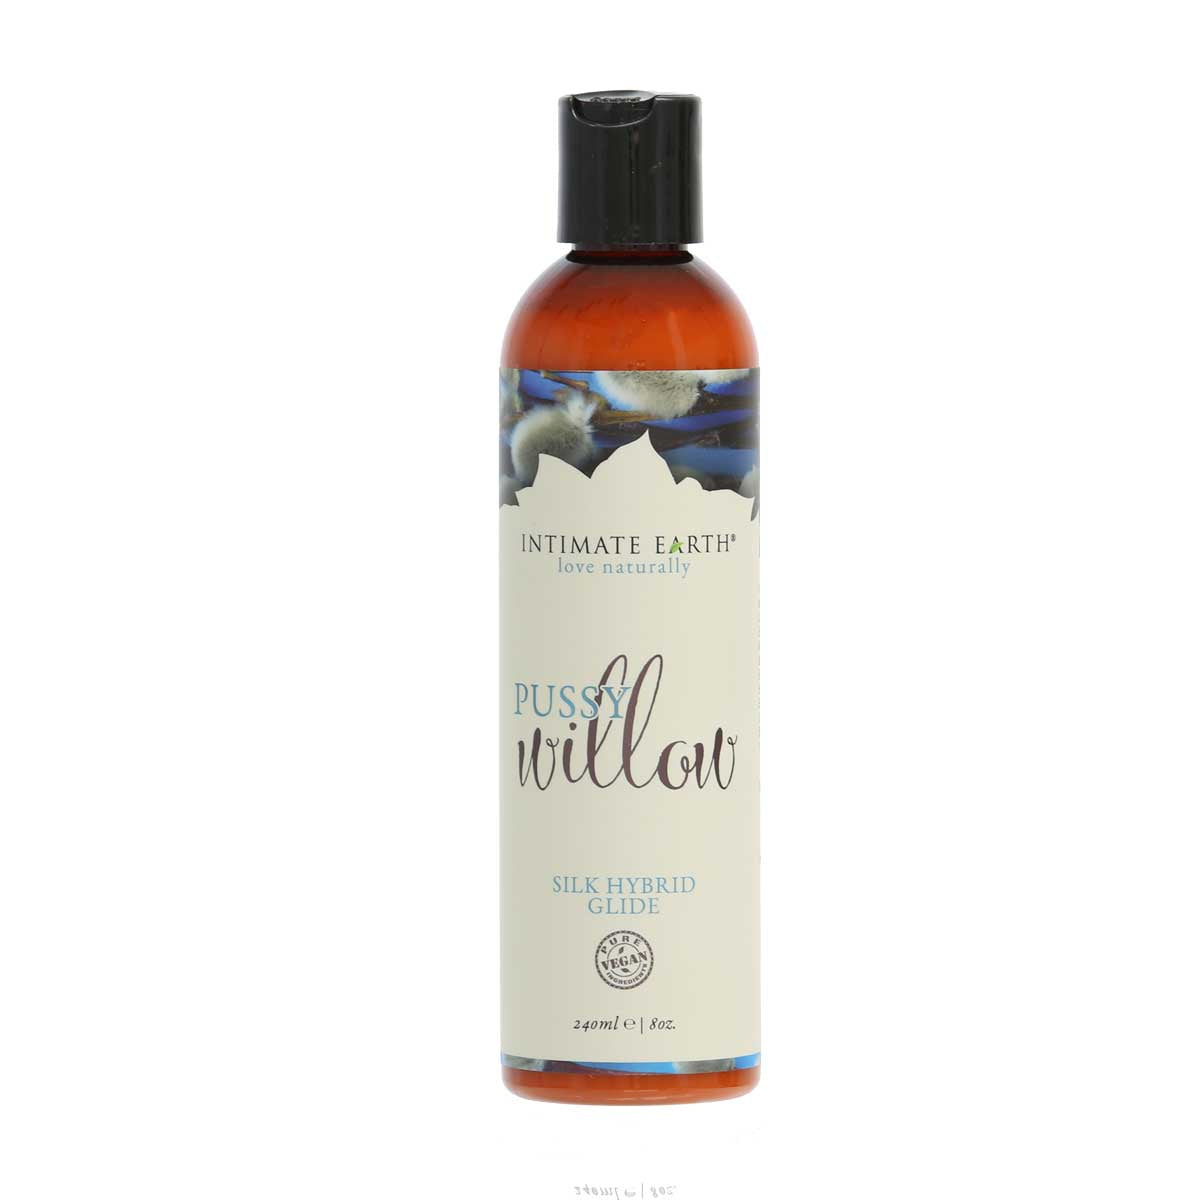 Intimate Earth - Pussy Willow Silk Hybrid Glide - 8 oz